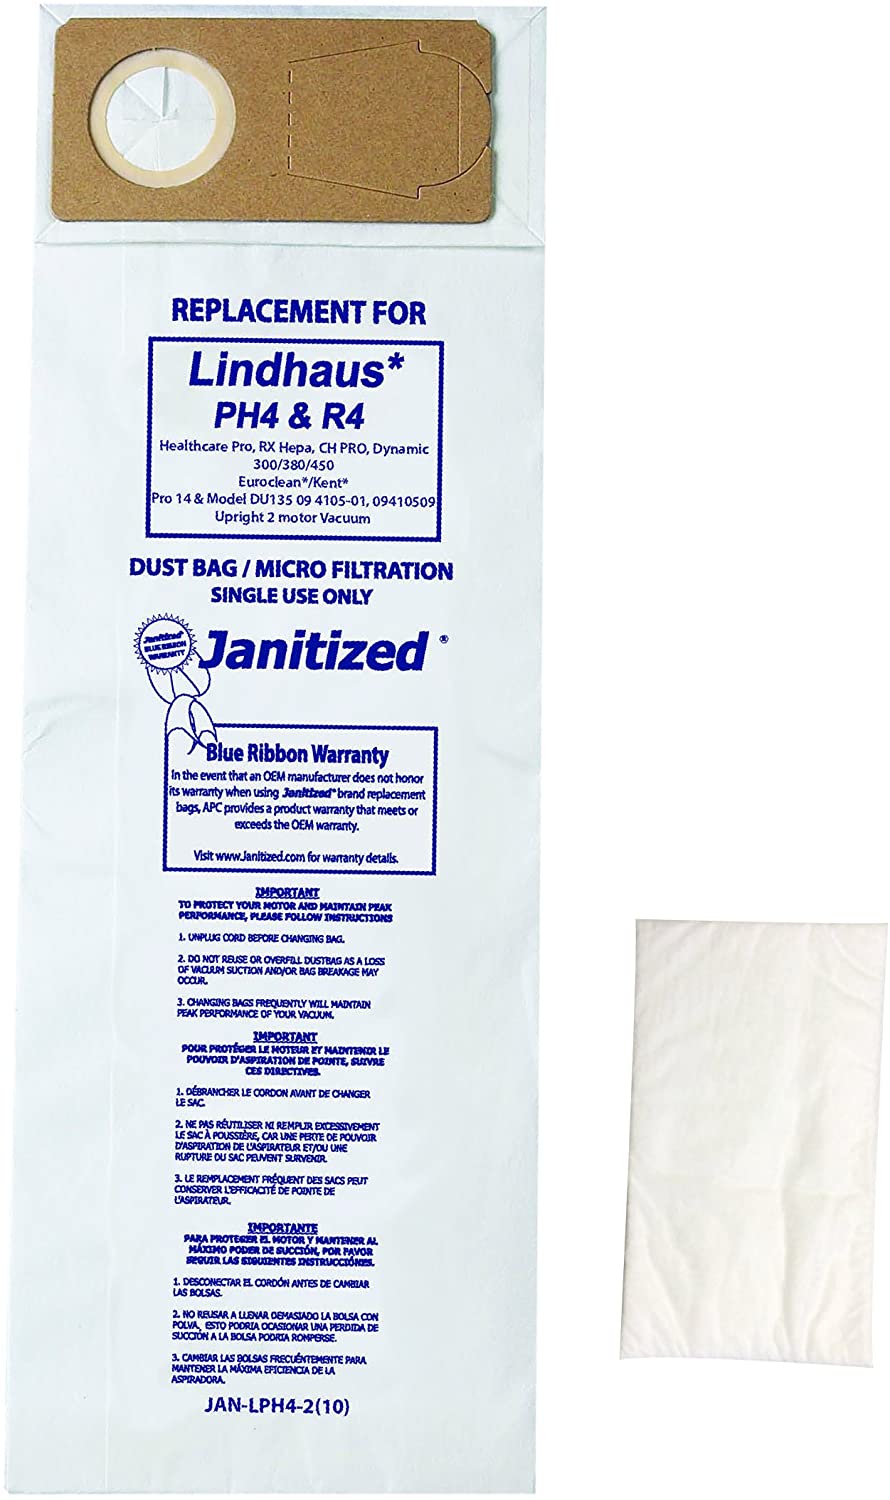 Janitized JAN-LPH4-2(10) Premium Replacement Commercial Vac Bag, Lindhaus Pro, Dynamic 300/380/450, OEM#PH4, R4, 141299001, 141296200 (Pack of 10)